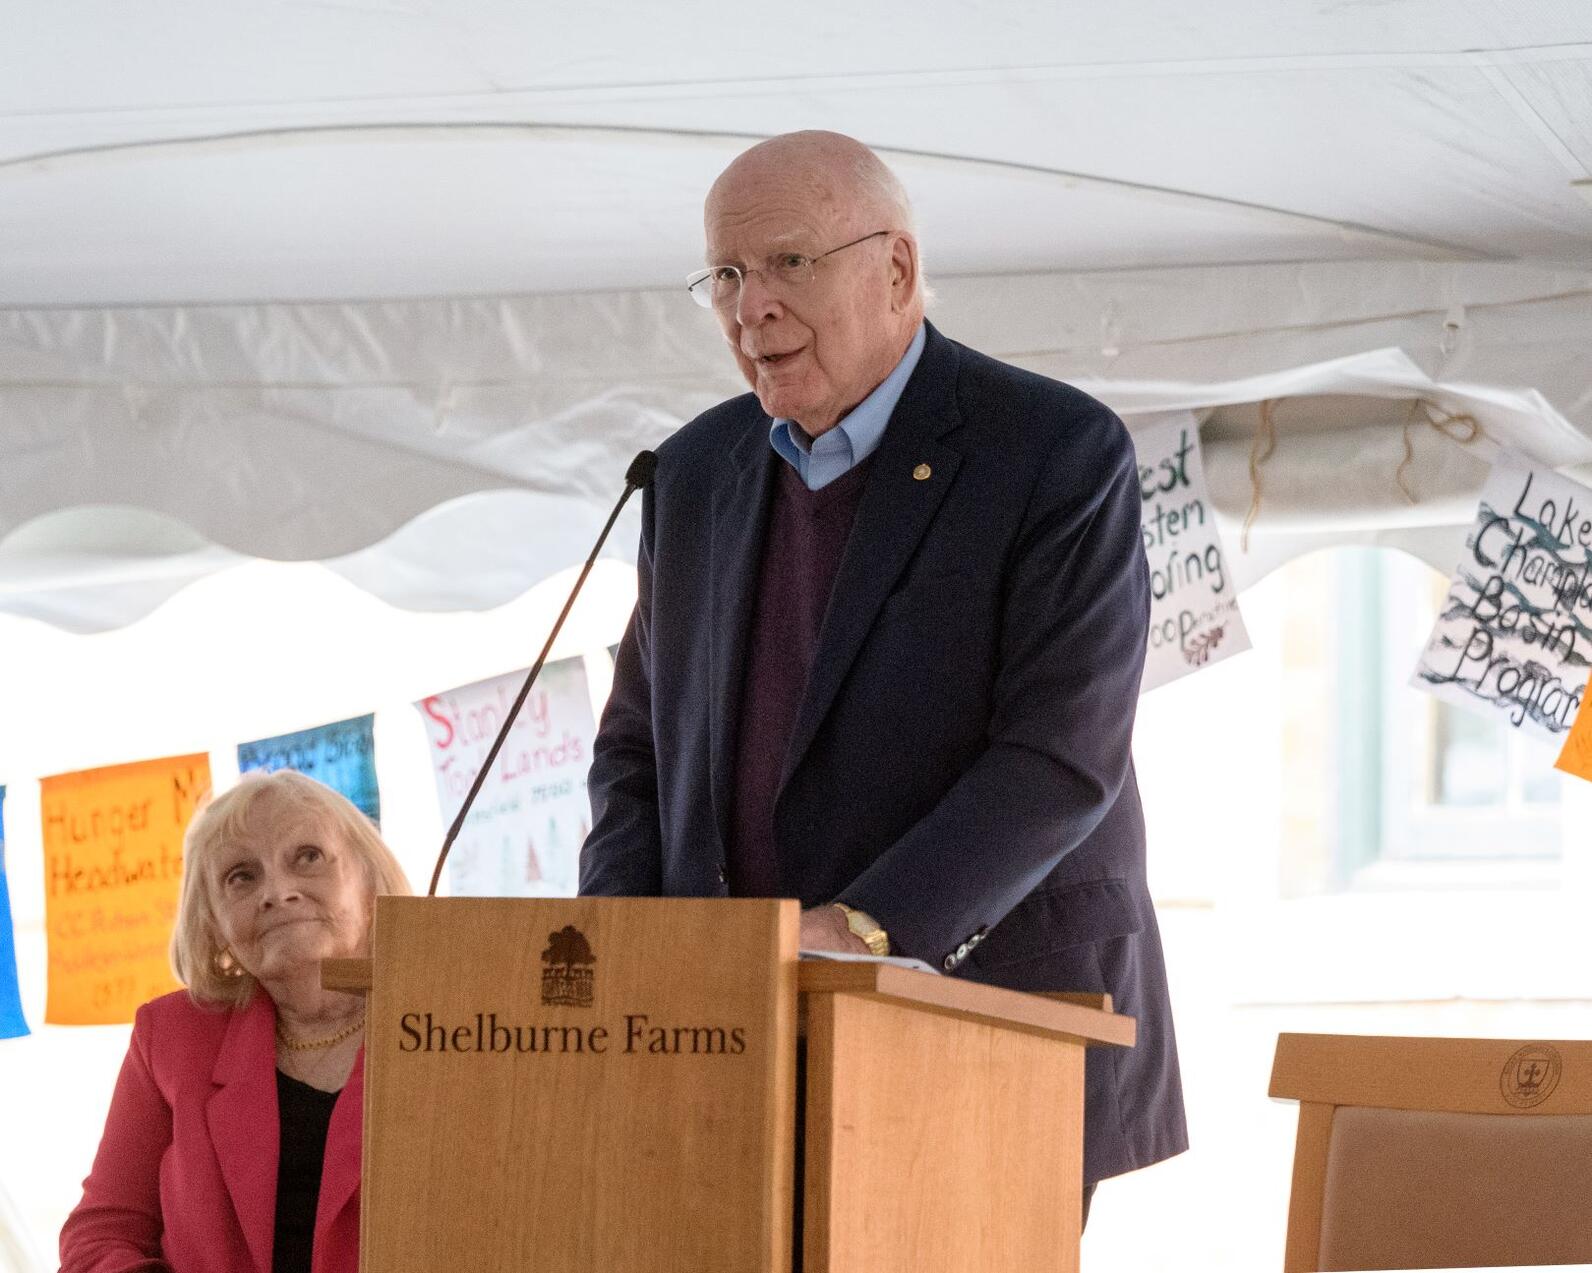 Senator Patrick Leahy, center, stands at a podium that reads “Shelburne Farms,” while Marcelle Pomerleau, his wife, right, looks on. 